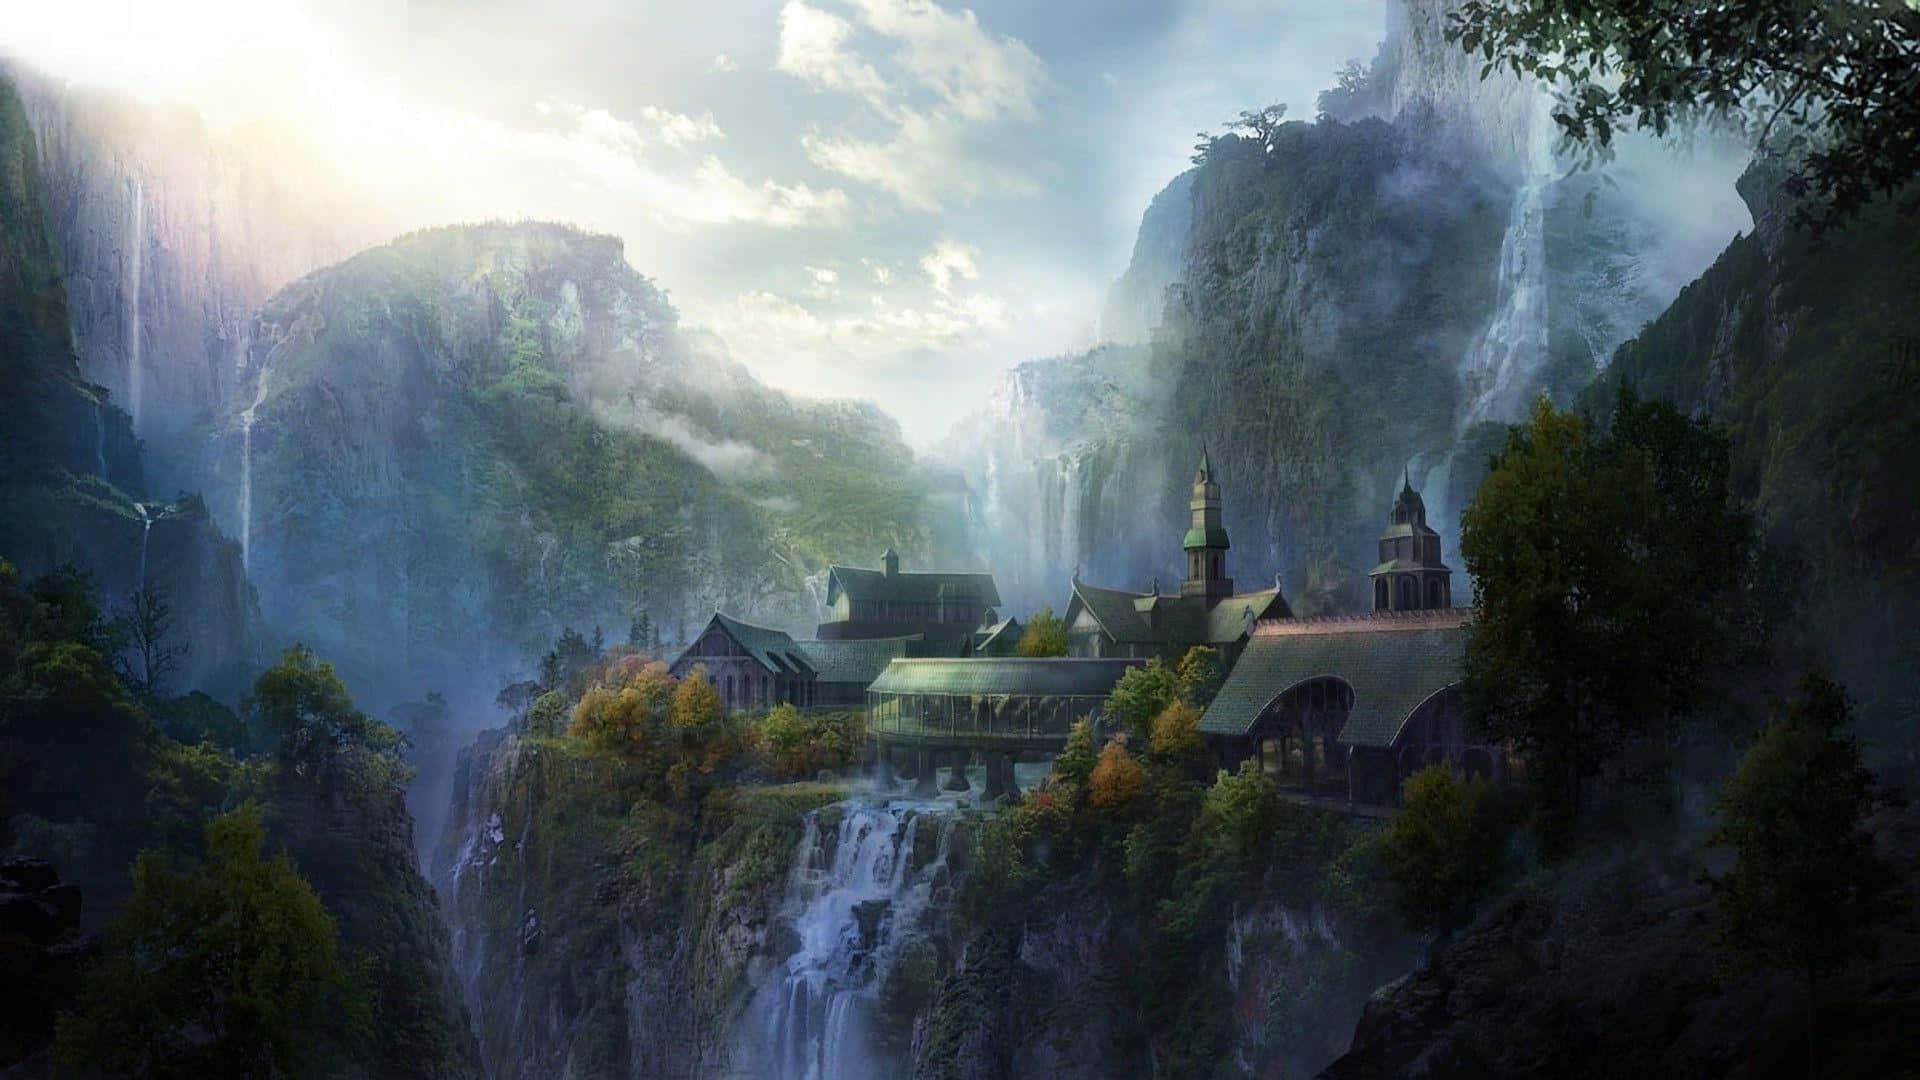 A Fantasy Scene With A Waterfall And A Castle